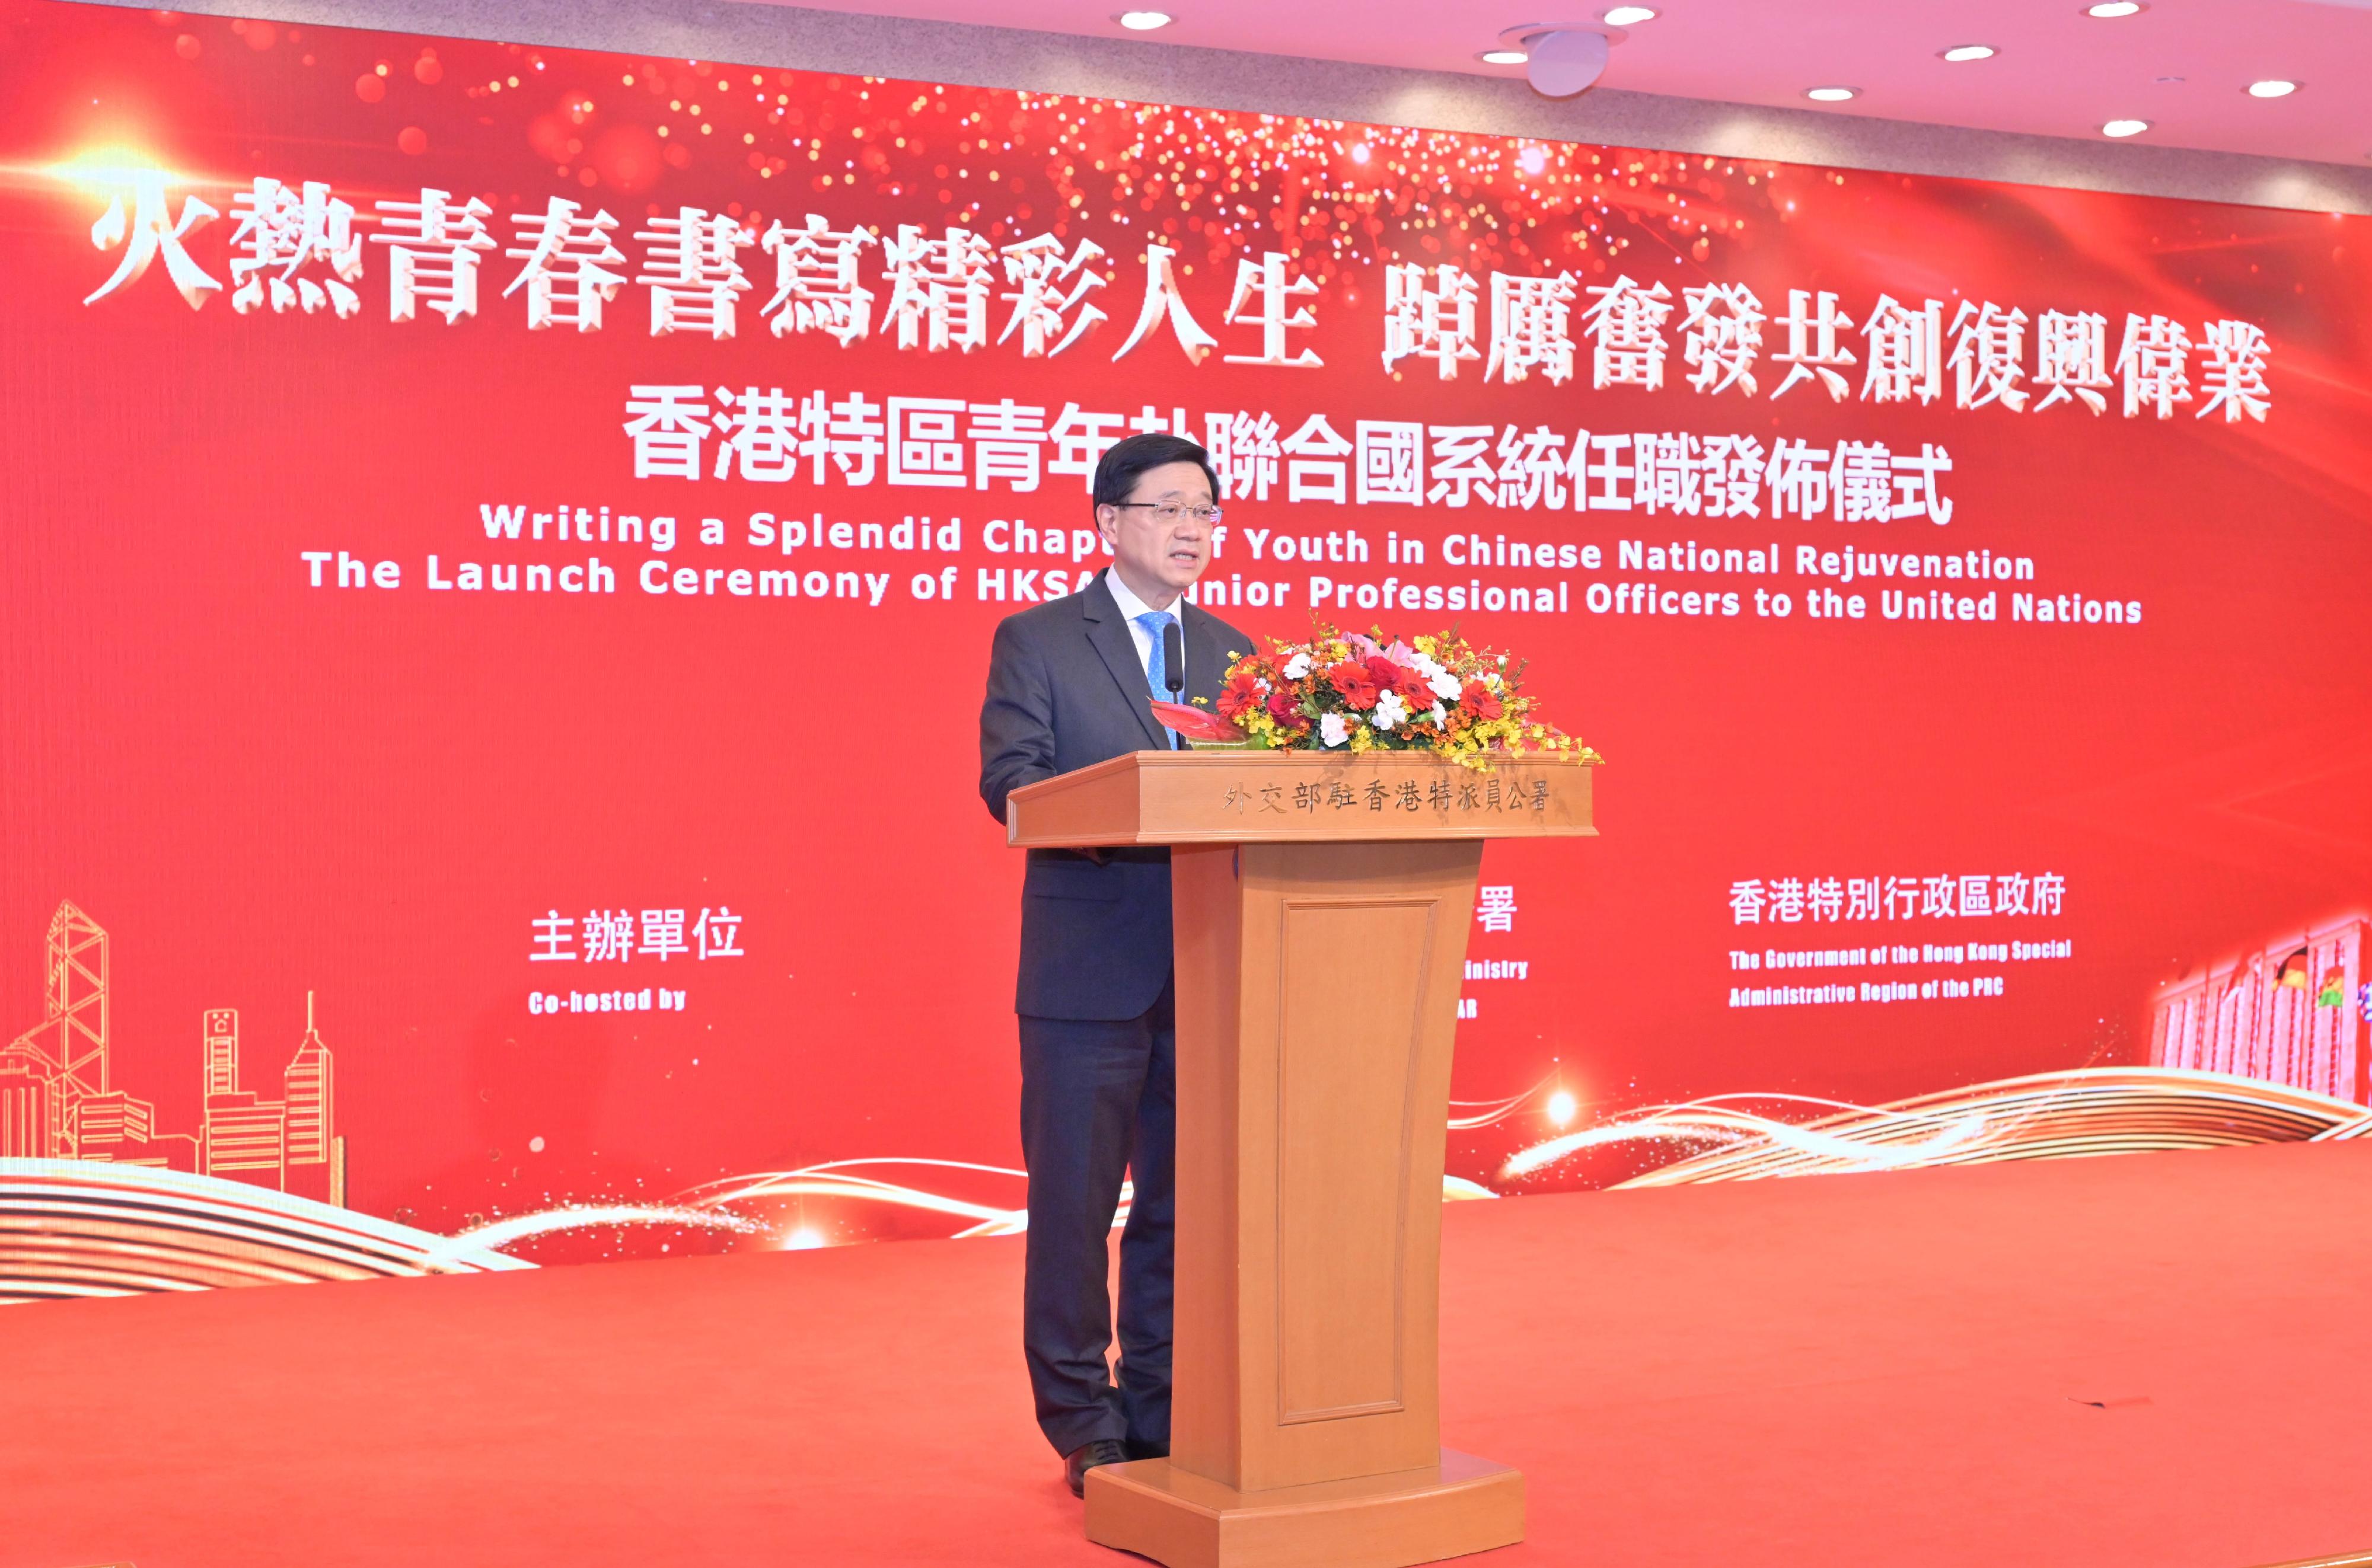 The Chief Executive, Mr John Lee, speaks at the Launch Ceremony of HKSAR Junior Professional Officers to the United Nations today (January 16).